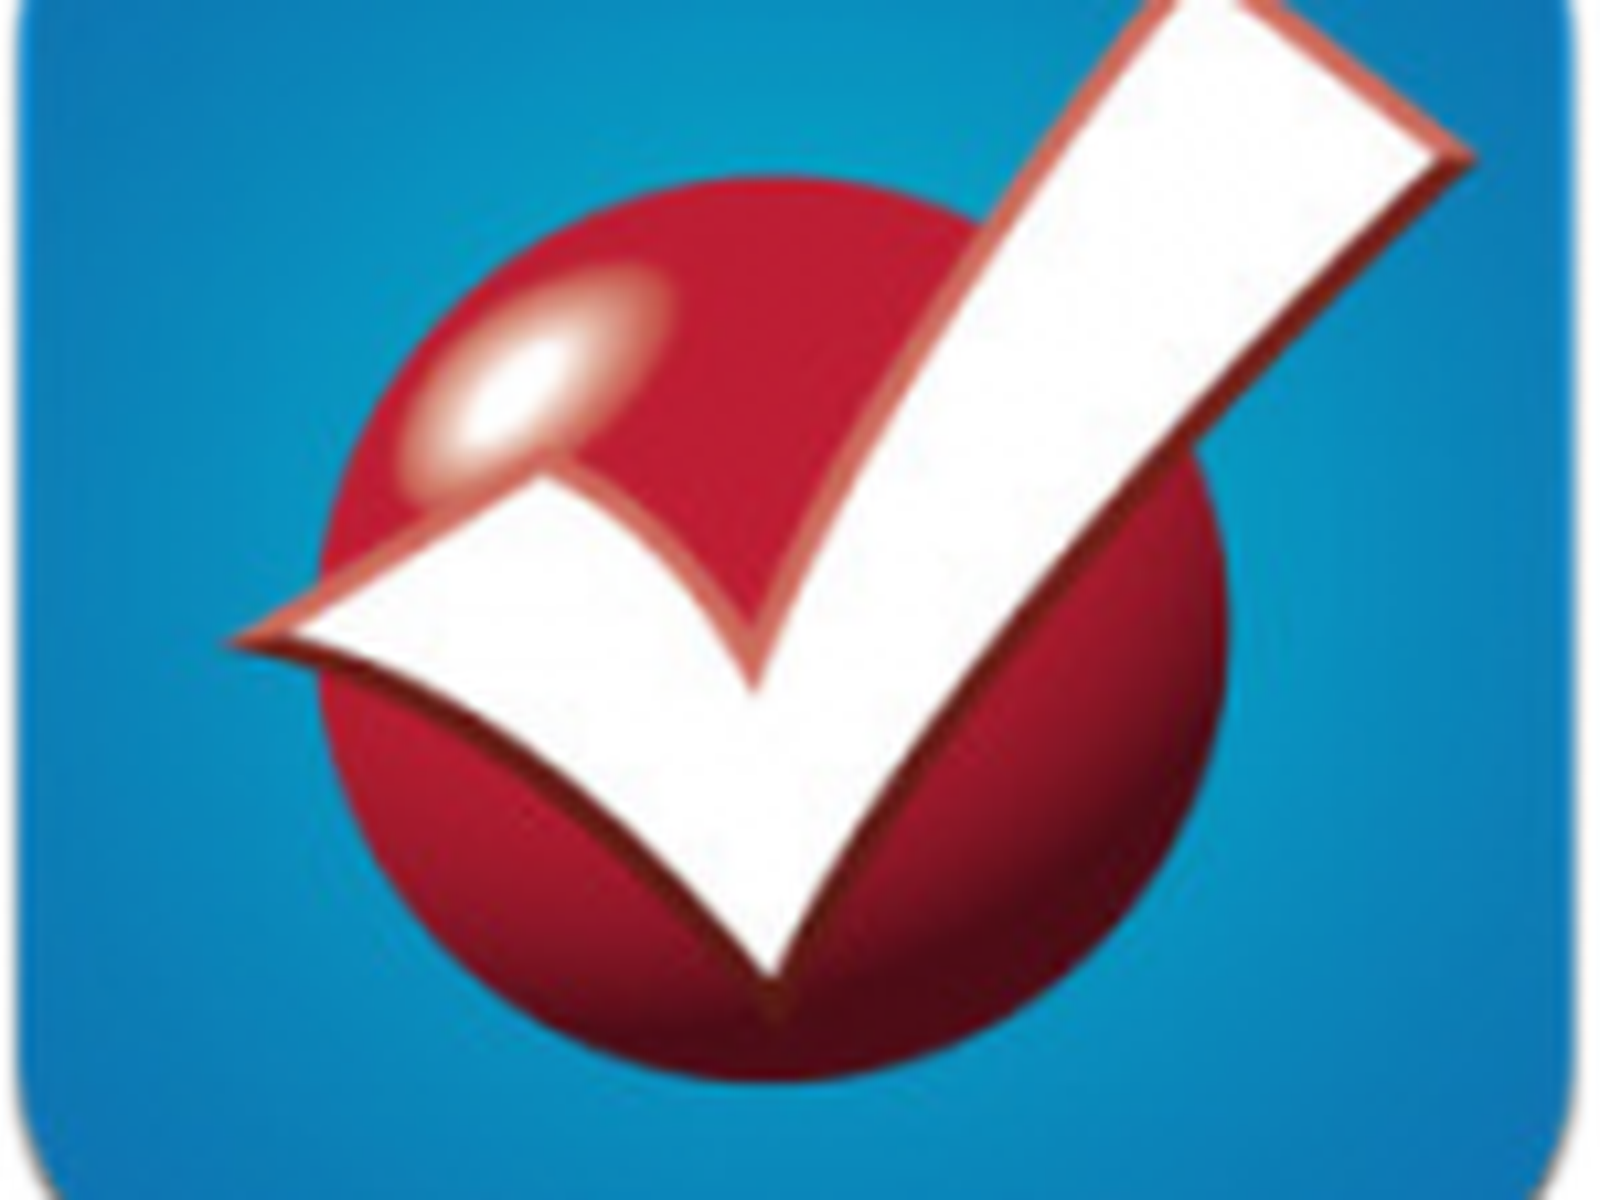 turbotax deluxe 2012 download for mac